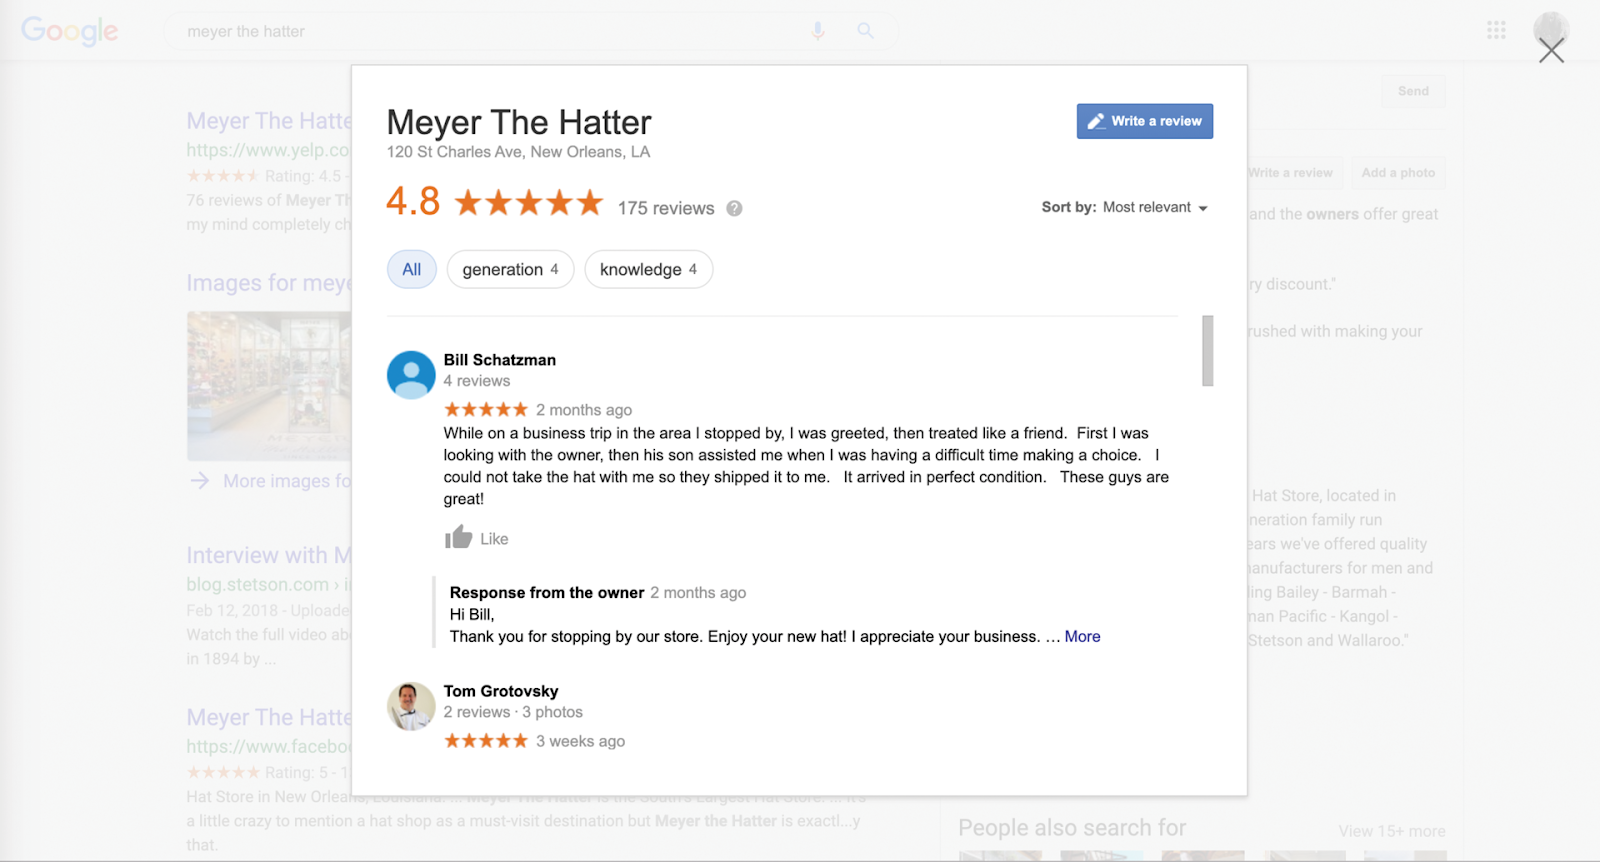 Review of Meyer The Hatter, talking about the great service with a response from the owner saying "thank you."